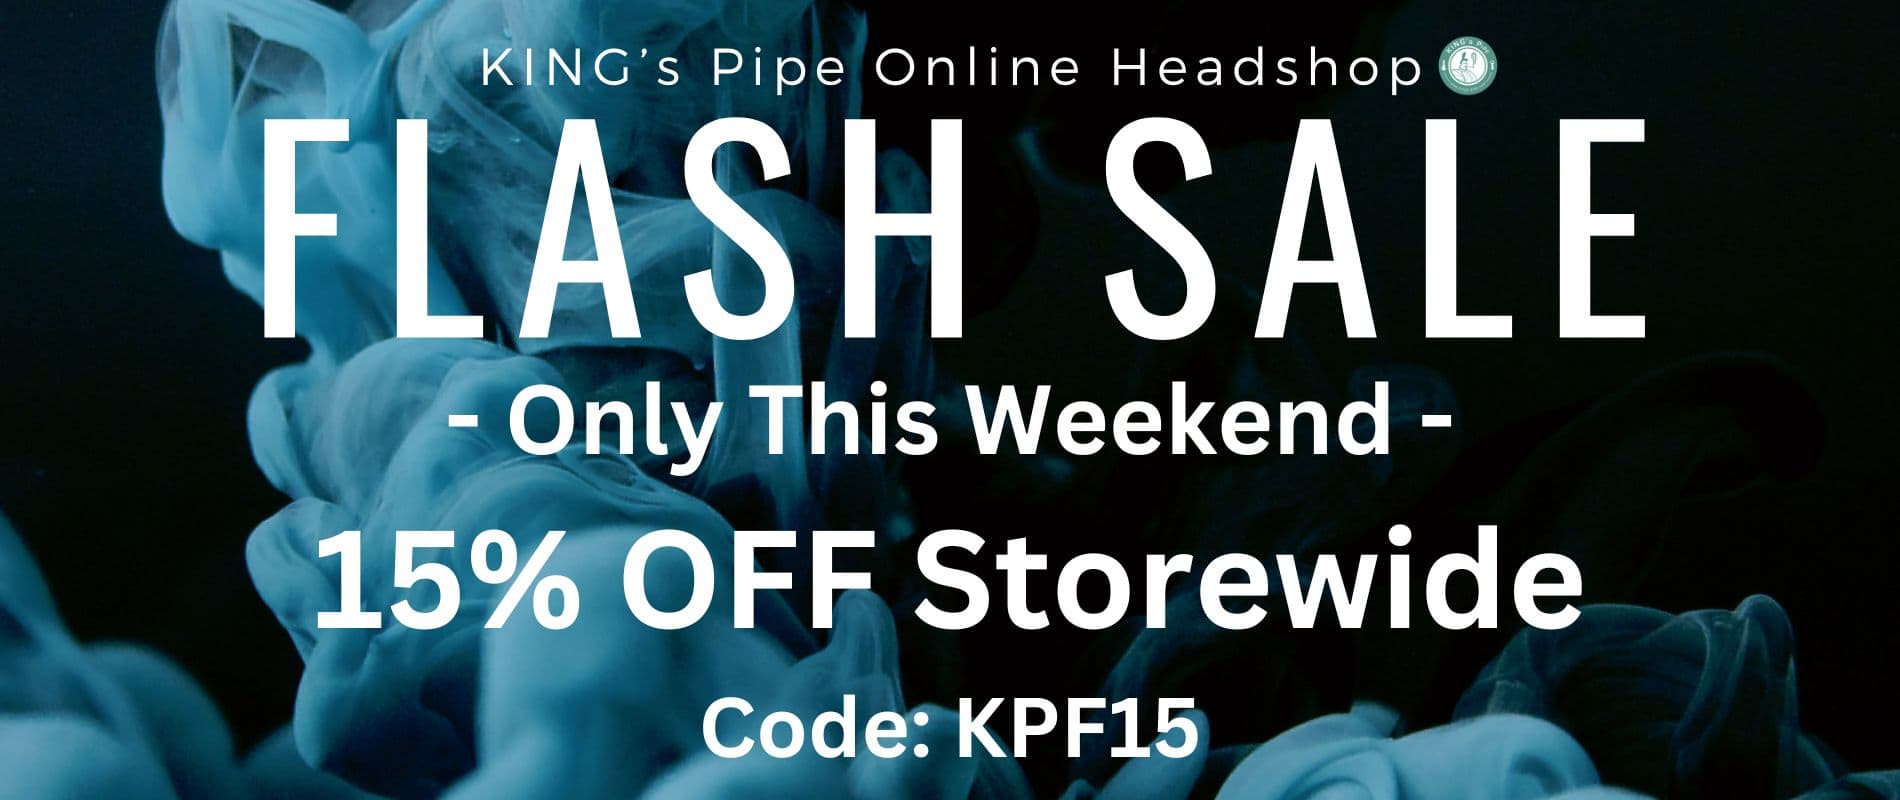 kings pipe online smoke shop 15% discount flash sale this weekend only